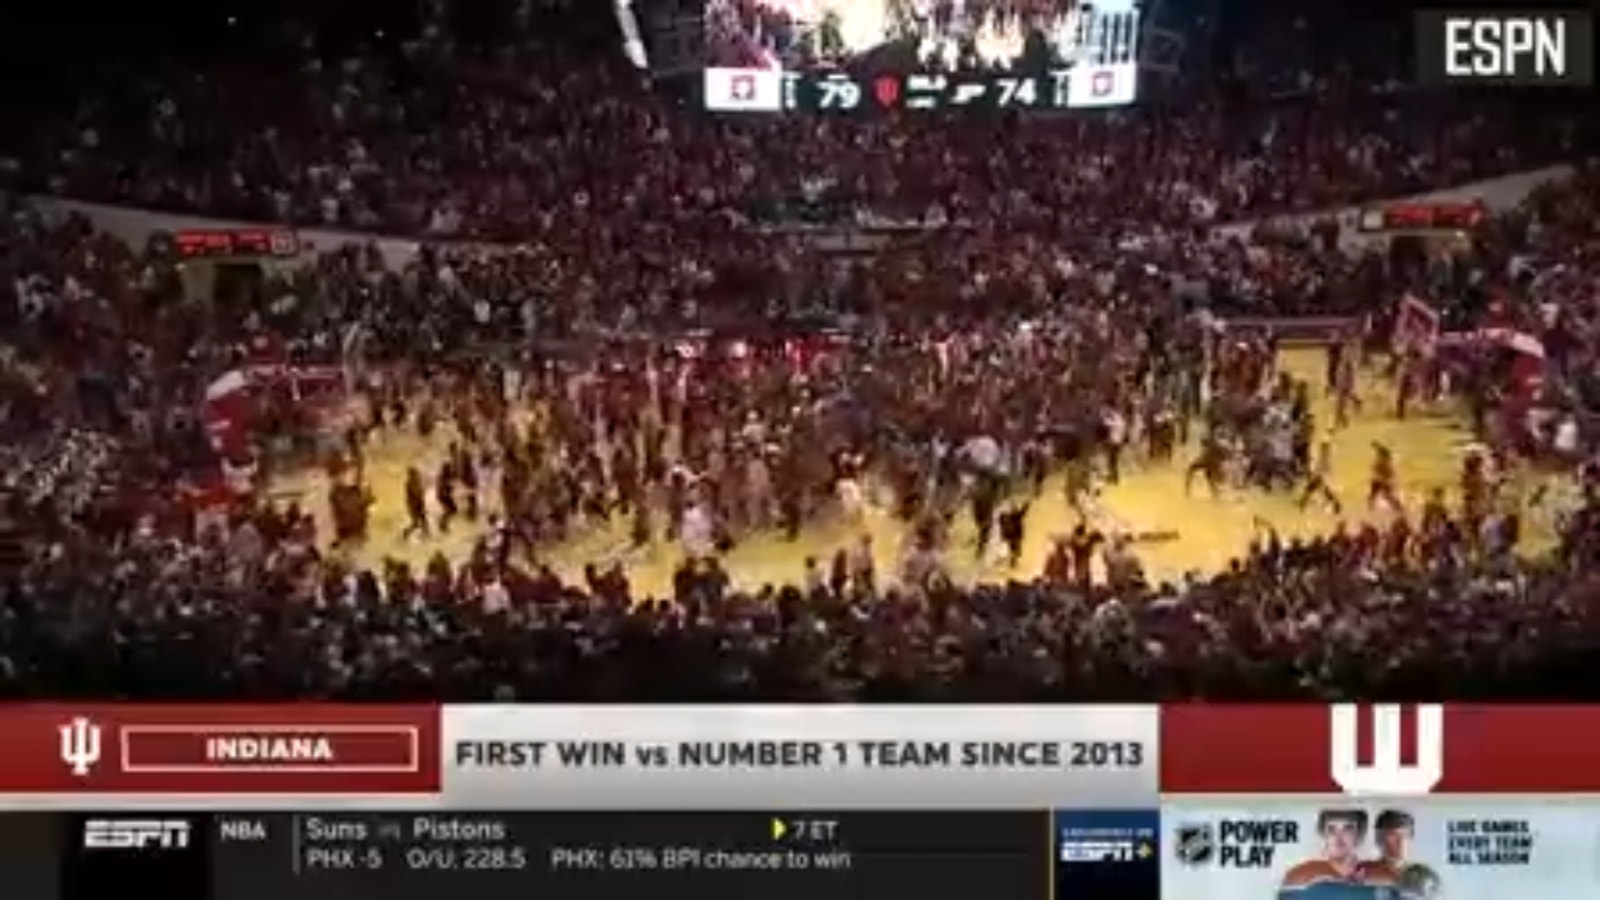 Fans storm the court after Indiana's elimination